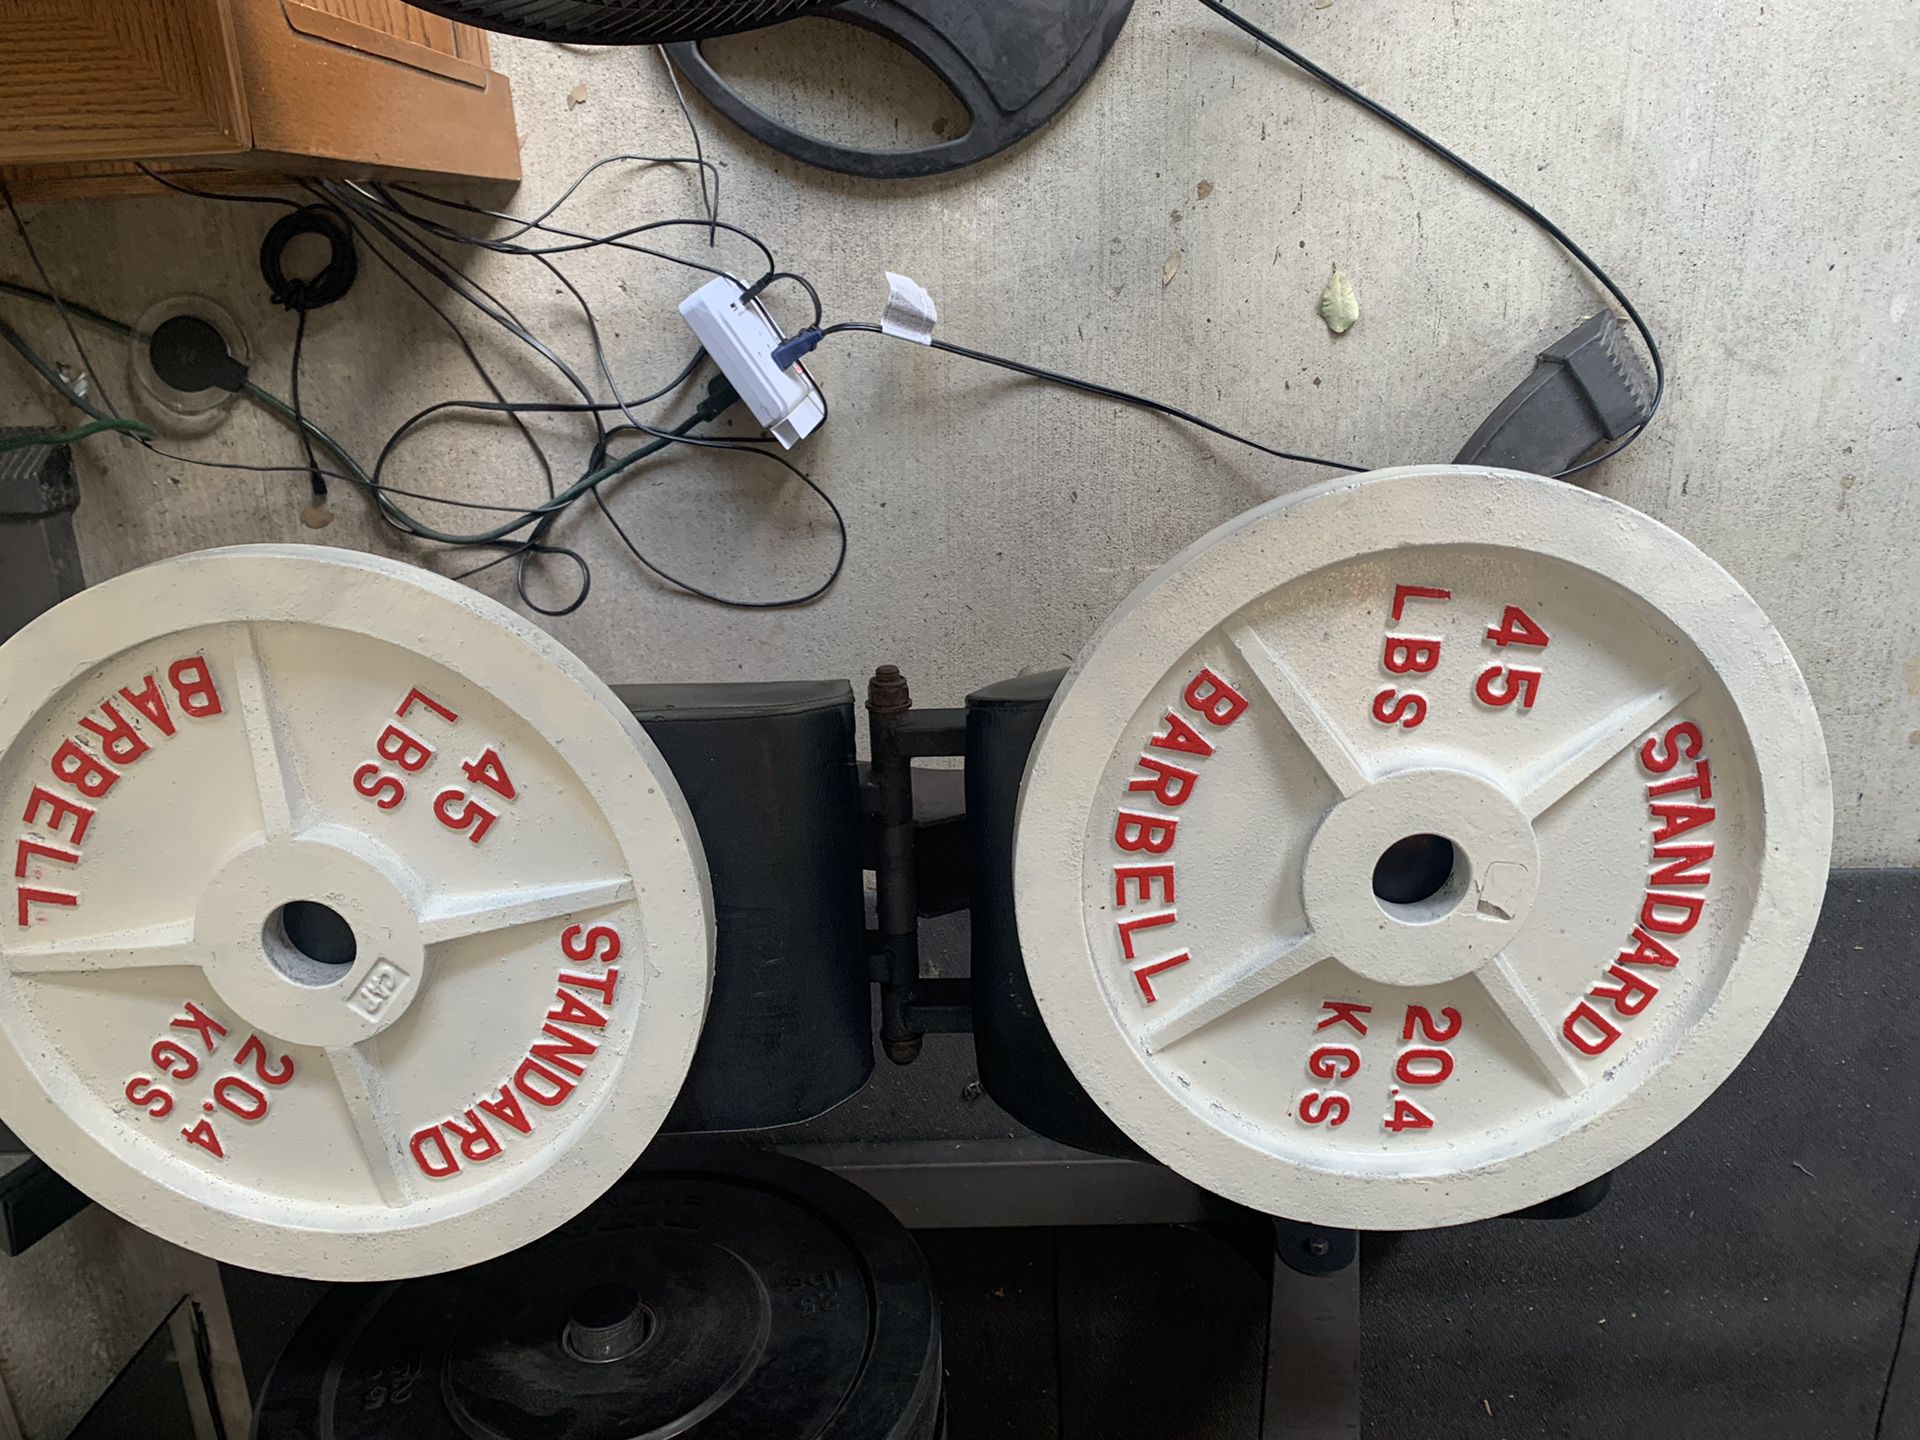 🔥Reduced🔥 2, 45lbs Olympic size weights